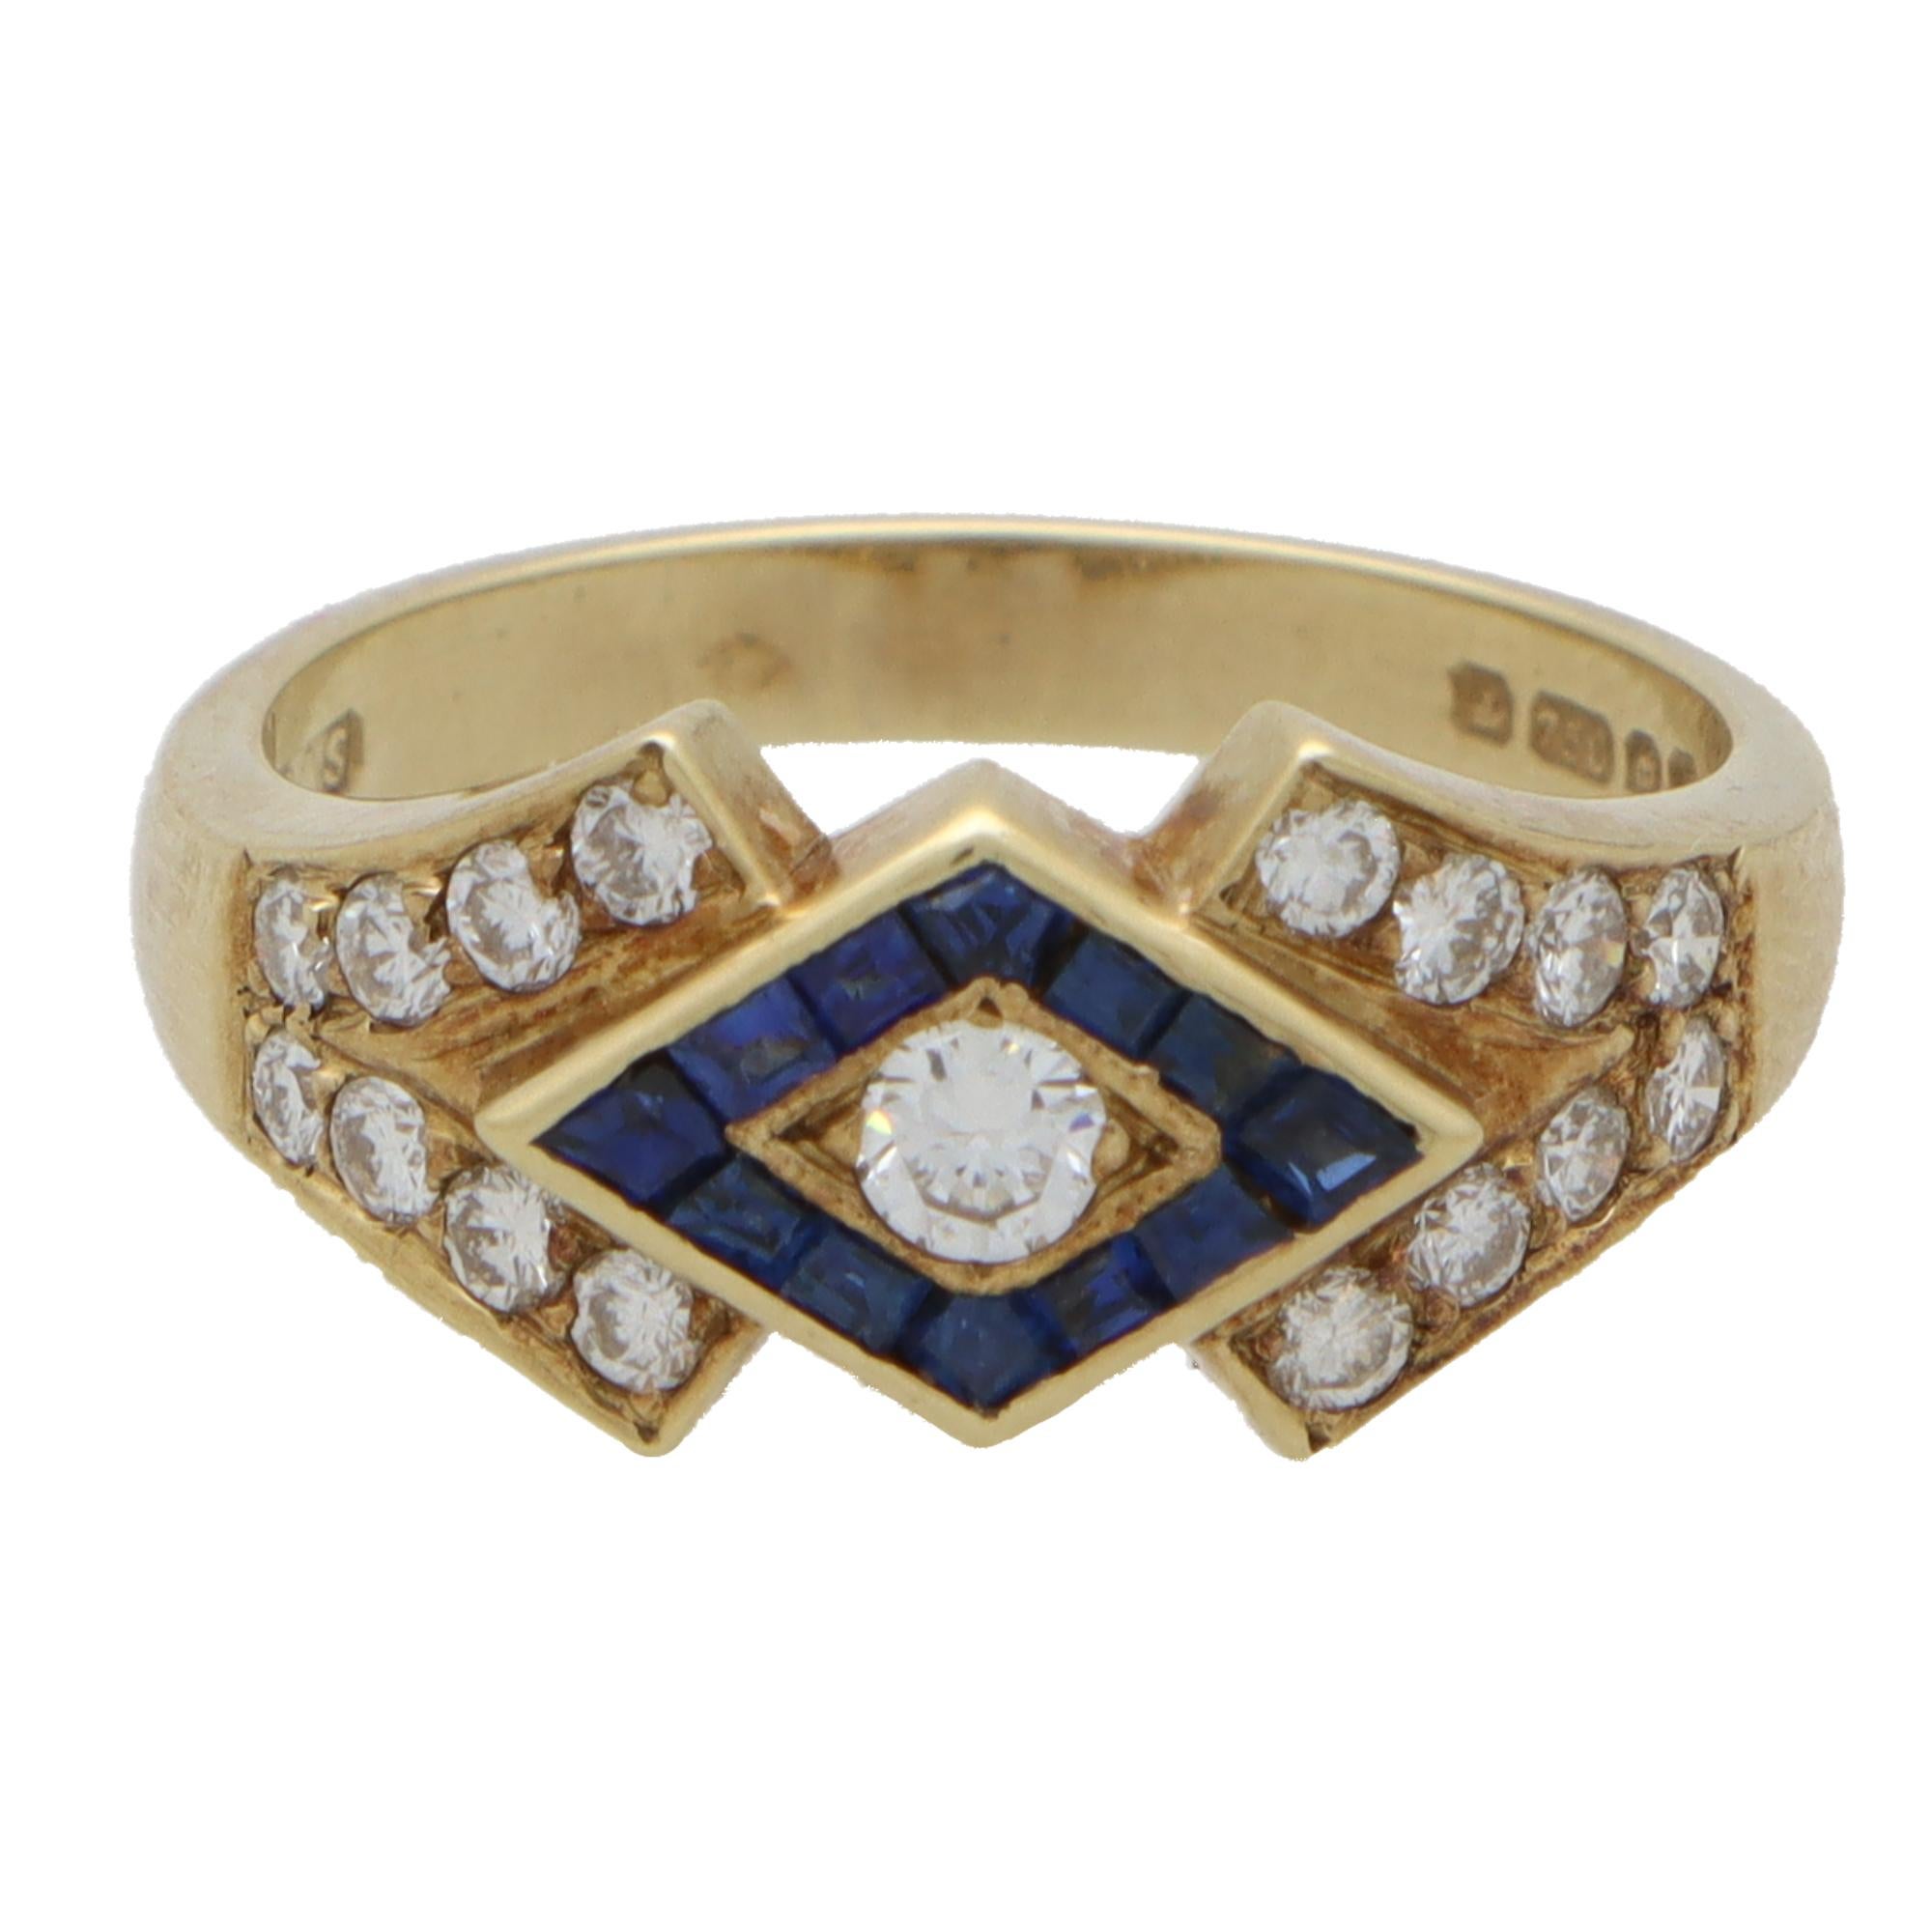 Modern Contemporary Sapphire and Diamond Dress Ring Set in 18k Yellow Gold